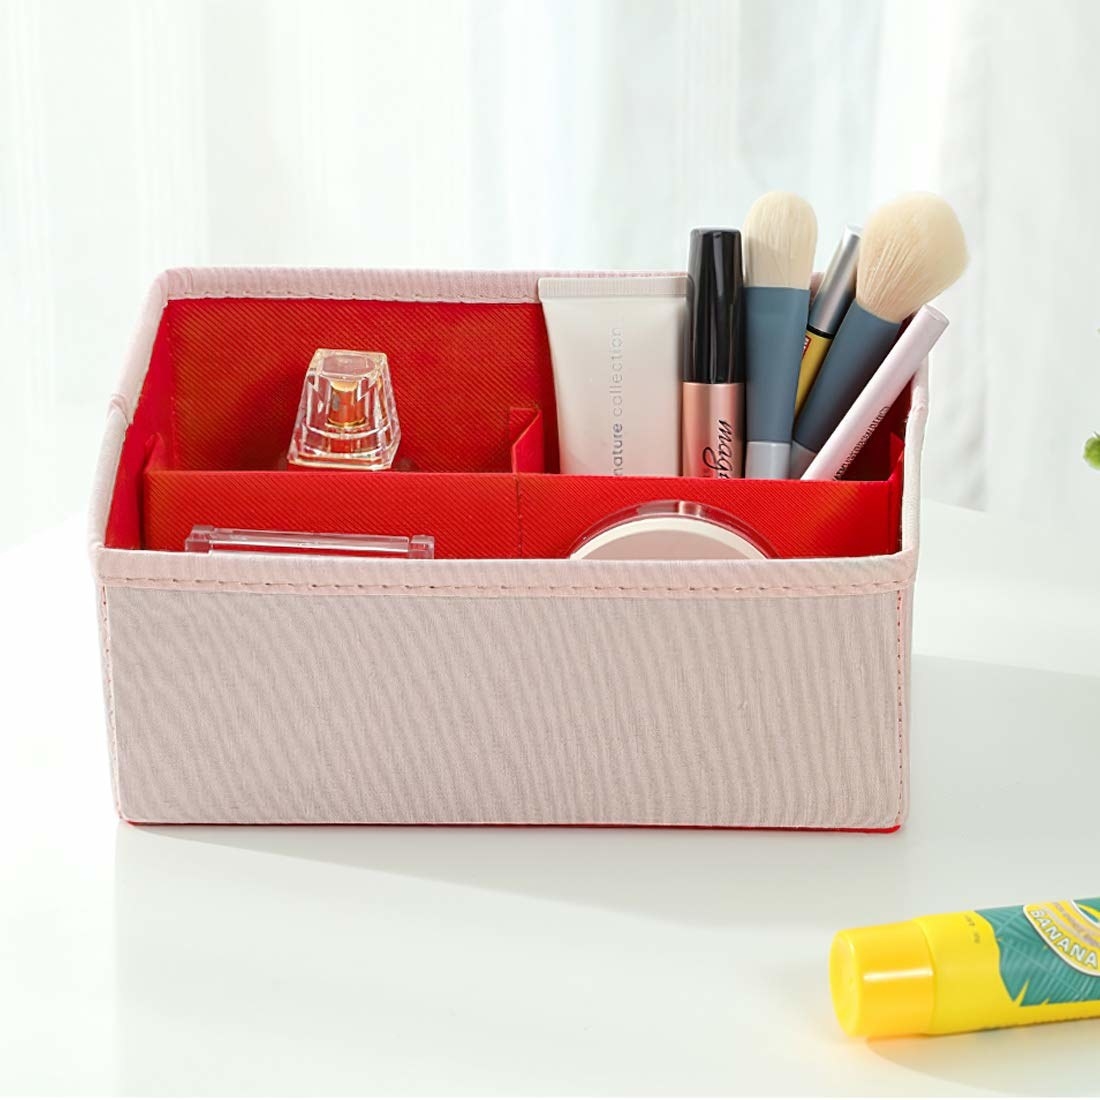 An organiser box that is pink on the outside and red on the inside containing cosmetics